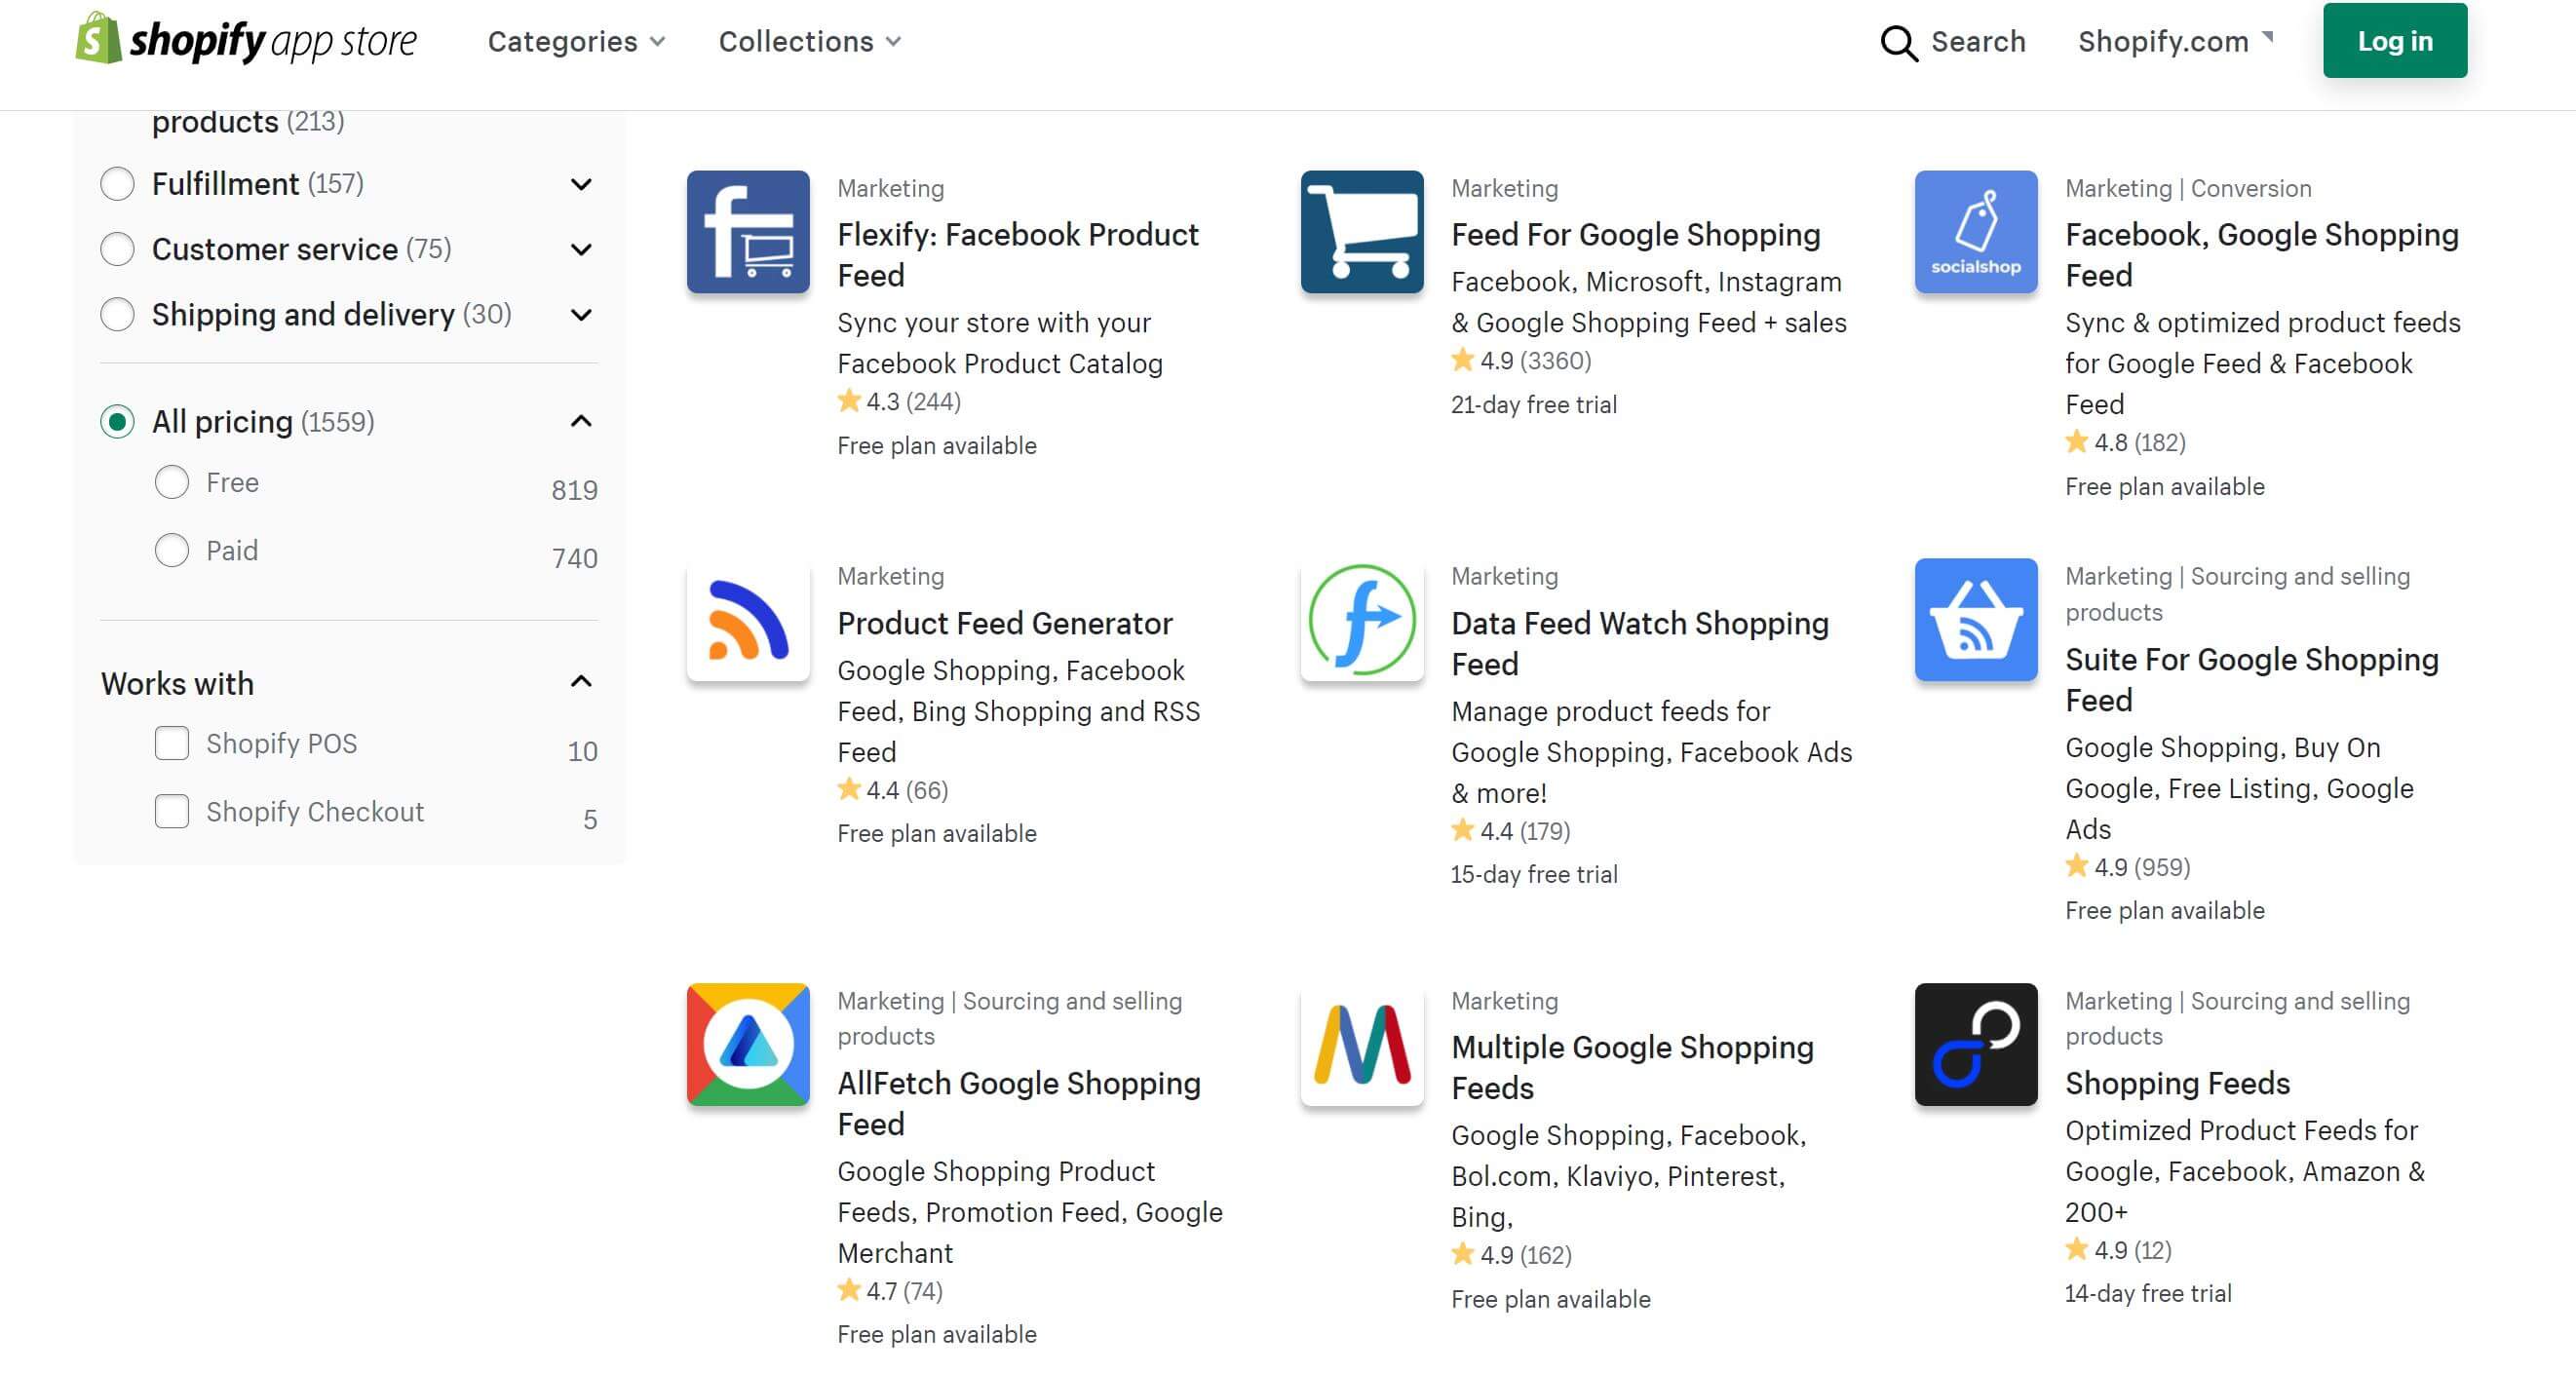 There are dozens of free Facebook product feed apps on the Shopify app store